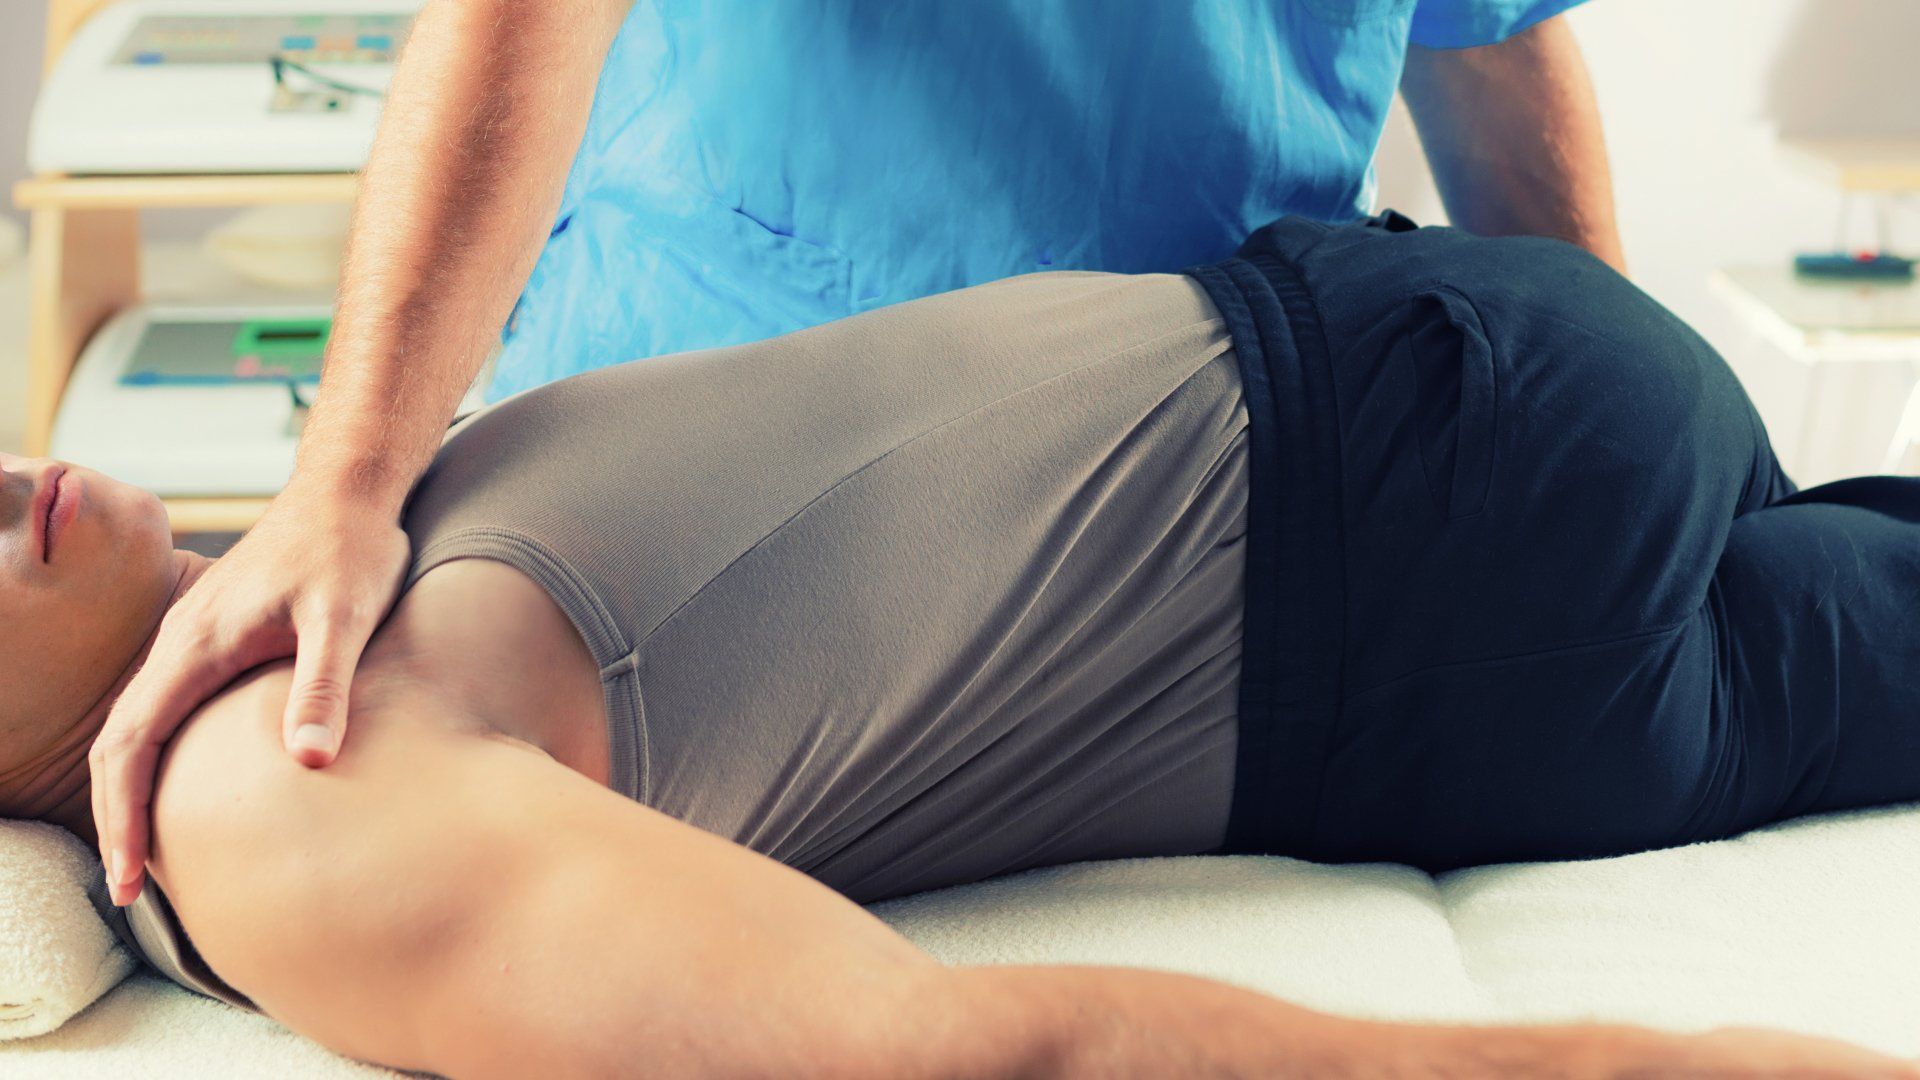 The Essential Guide to Chiropractic Adjustment for Lower Back Pain